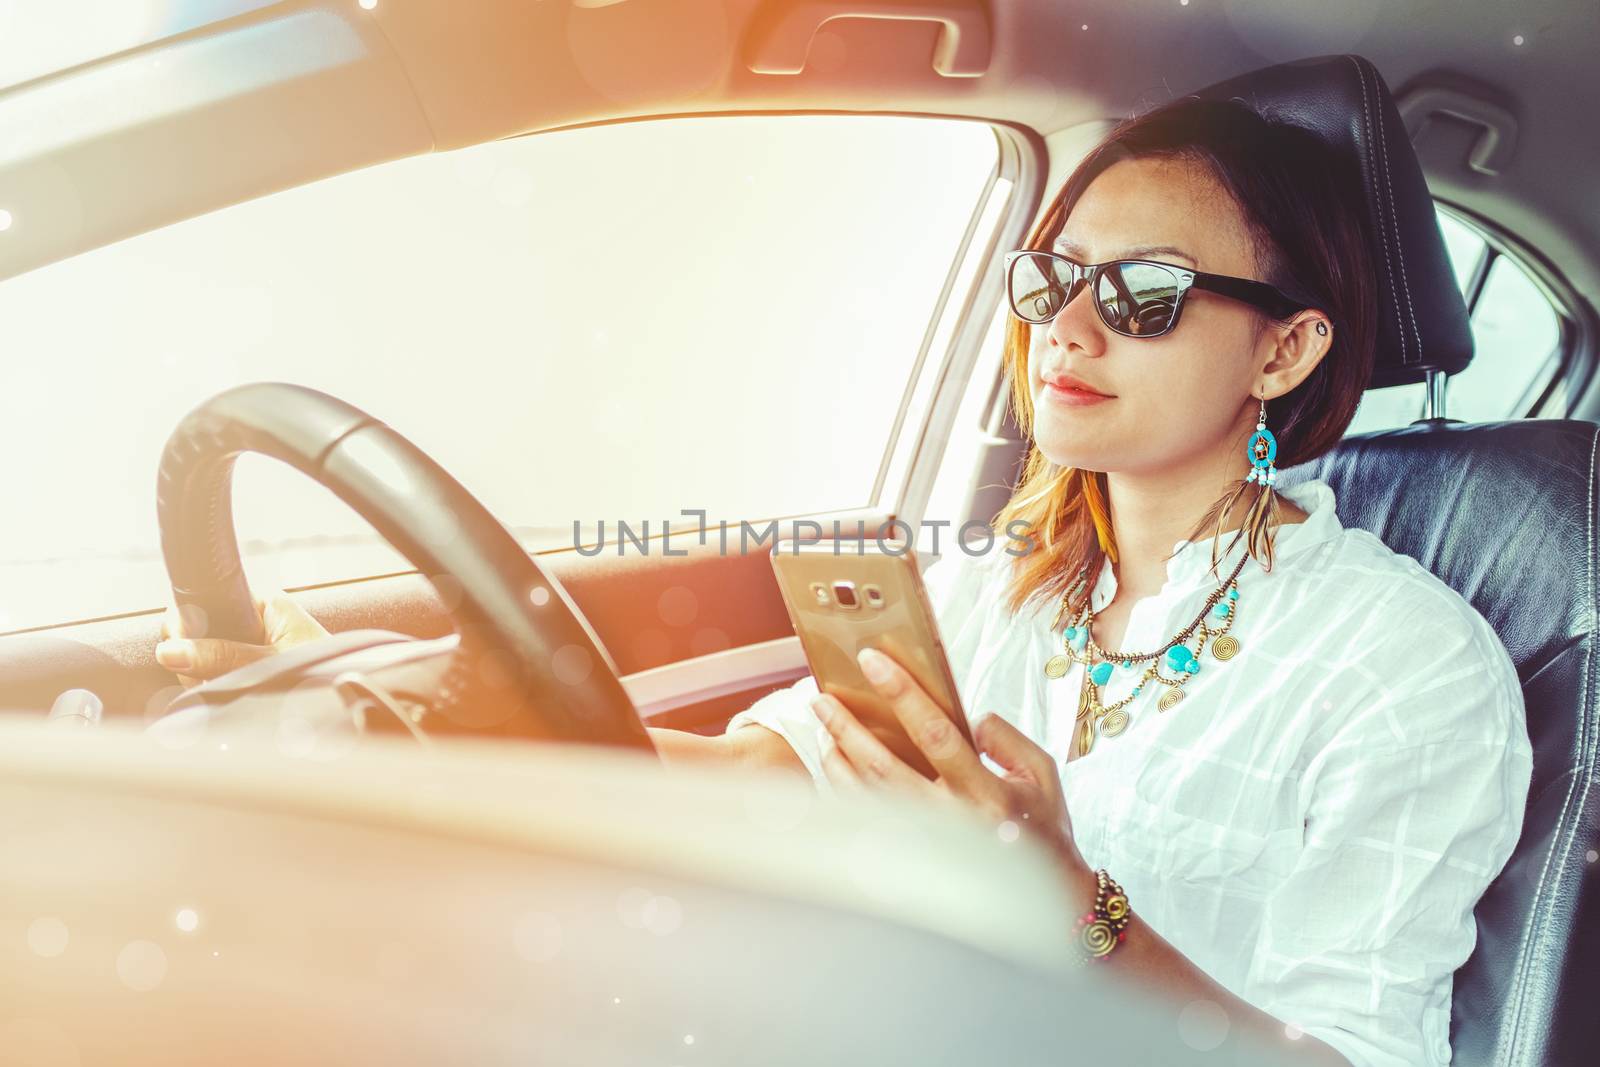 Asian woman looking at a smartphone in the car.